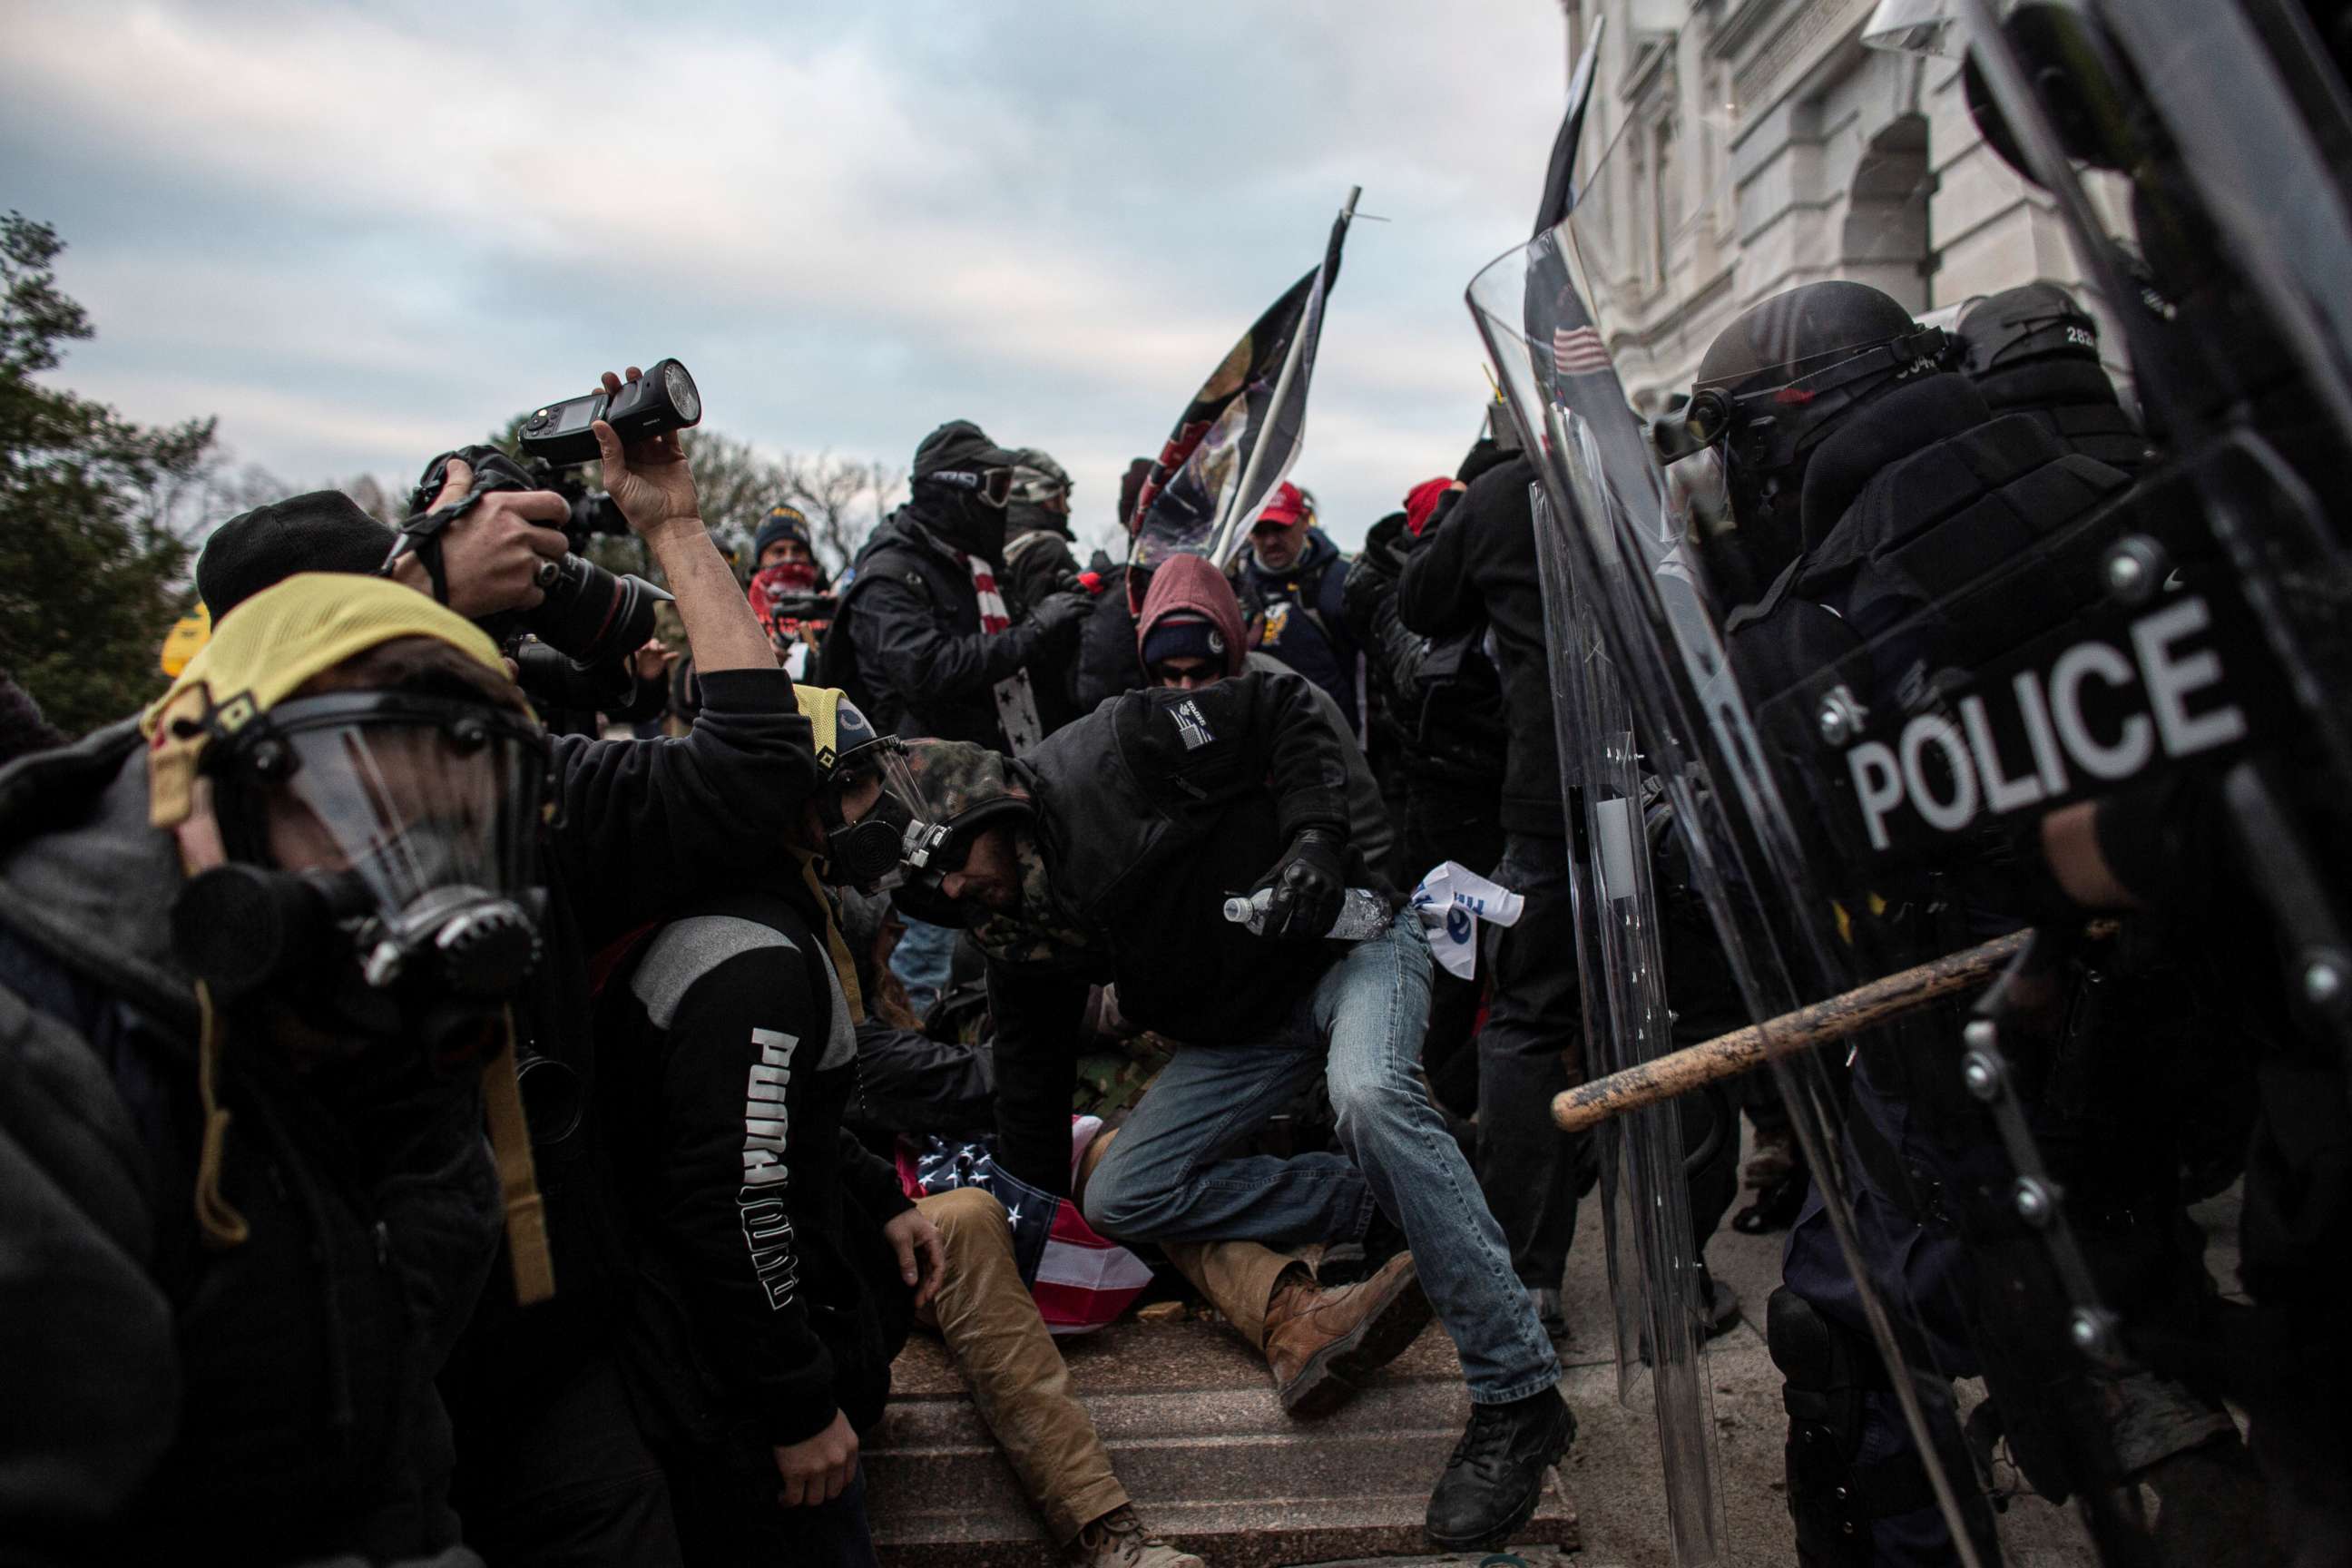 PHOTO: Pro-Trump protesters clash with police as they rally to contest the certification of the 2020 U.S. presidential election results at the U.S. Capitol Building in Washington, D.C., U.S. Jan. 6, 2021.